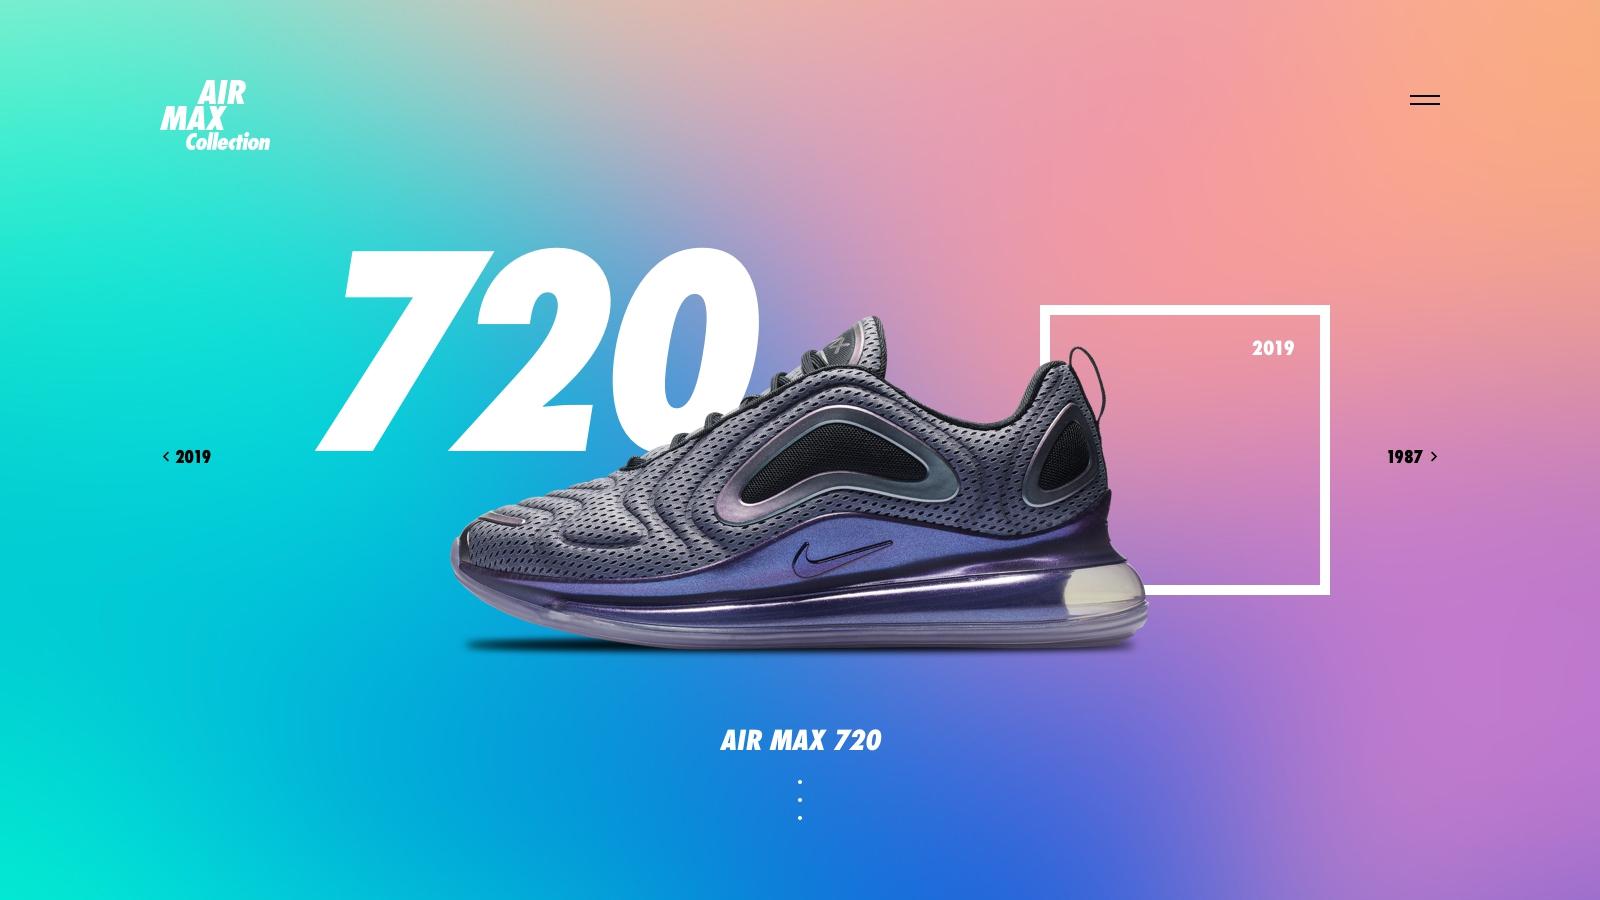 Web Experience Showing the History and Evolution of Nike's